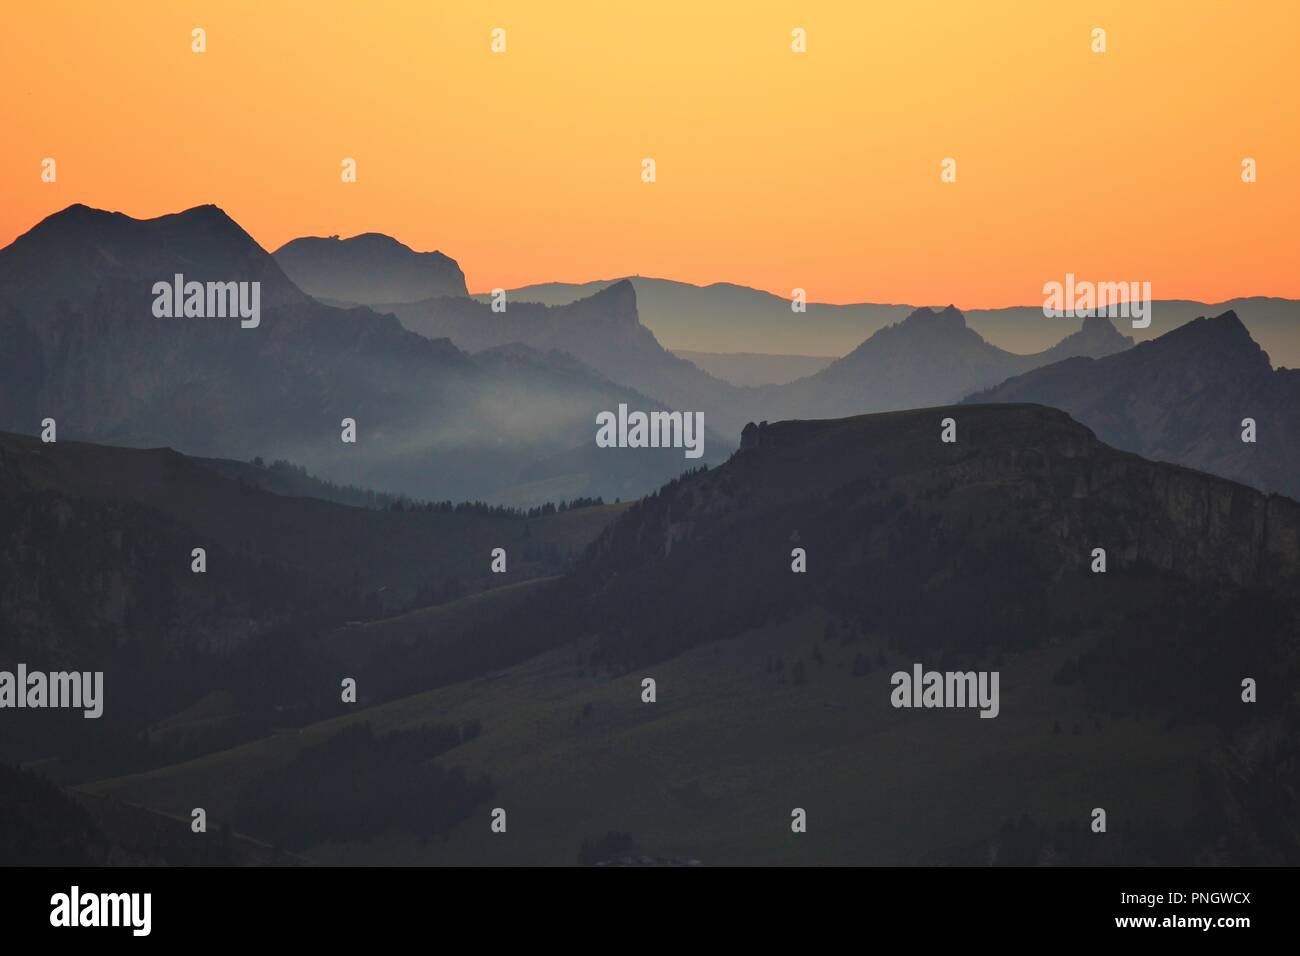 Mountains in the Bernese Oberland at sunset. View from Mount Niesen, Switzerland. Stock Photo